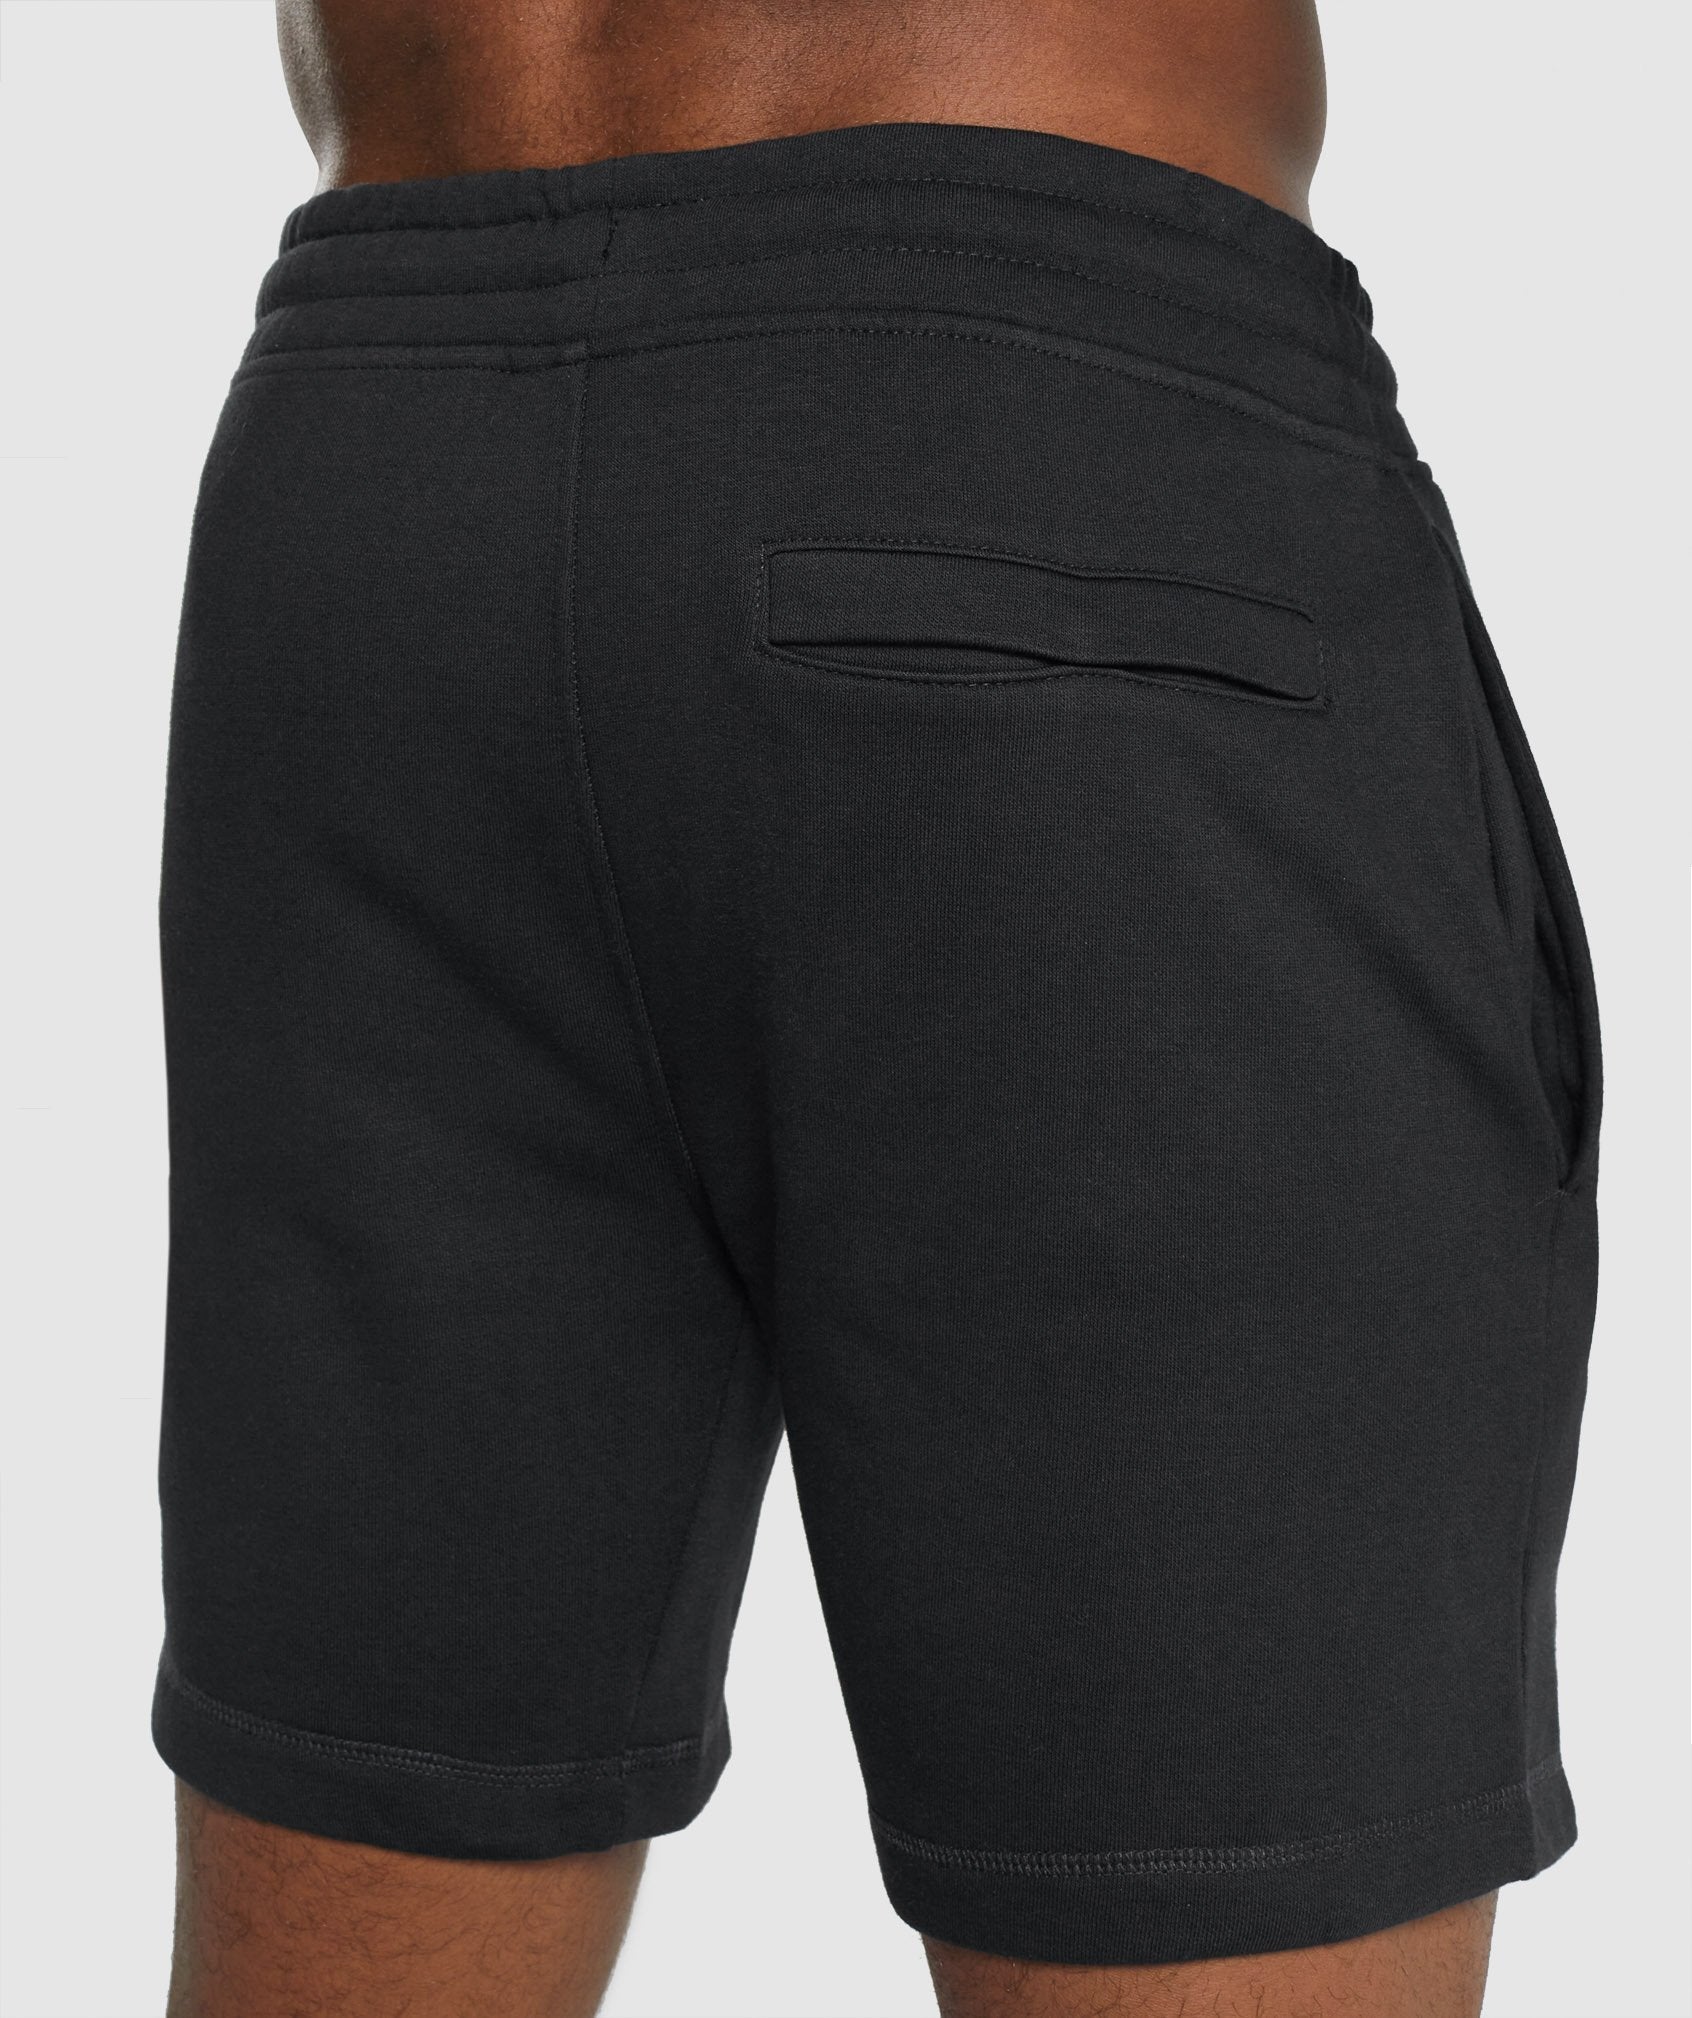 Gymshark Crest 7” inseam shorts. Perfect shorts for us short kings and, Shorts